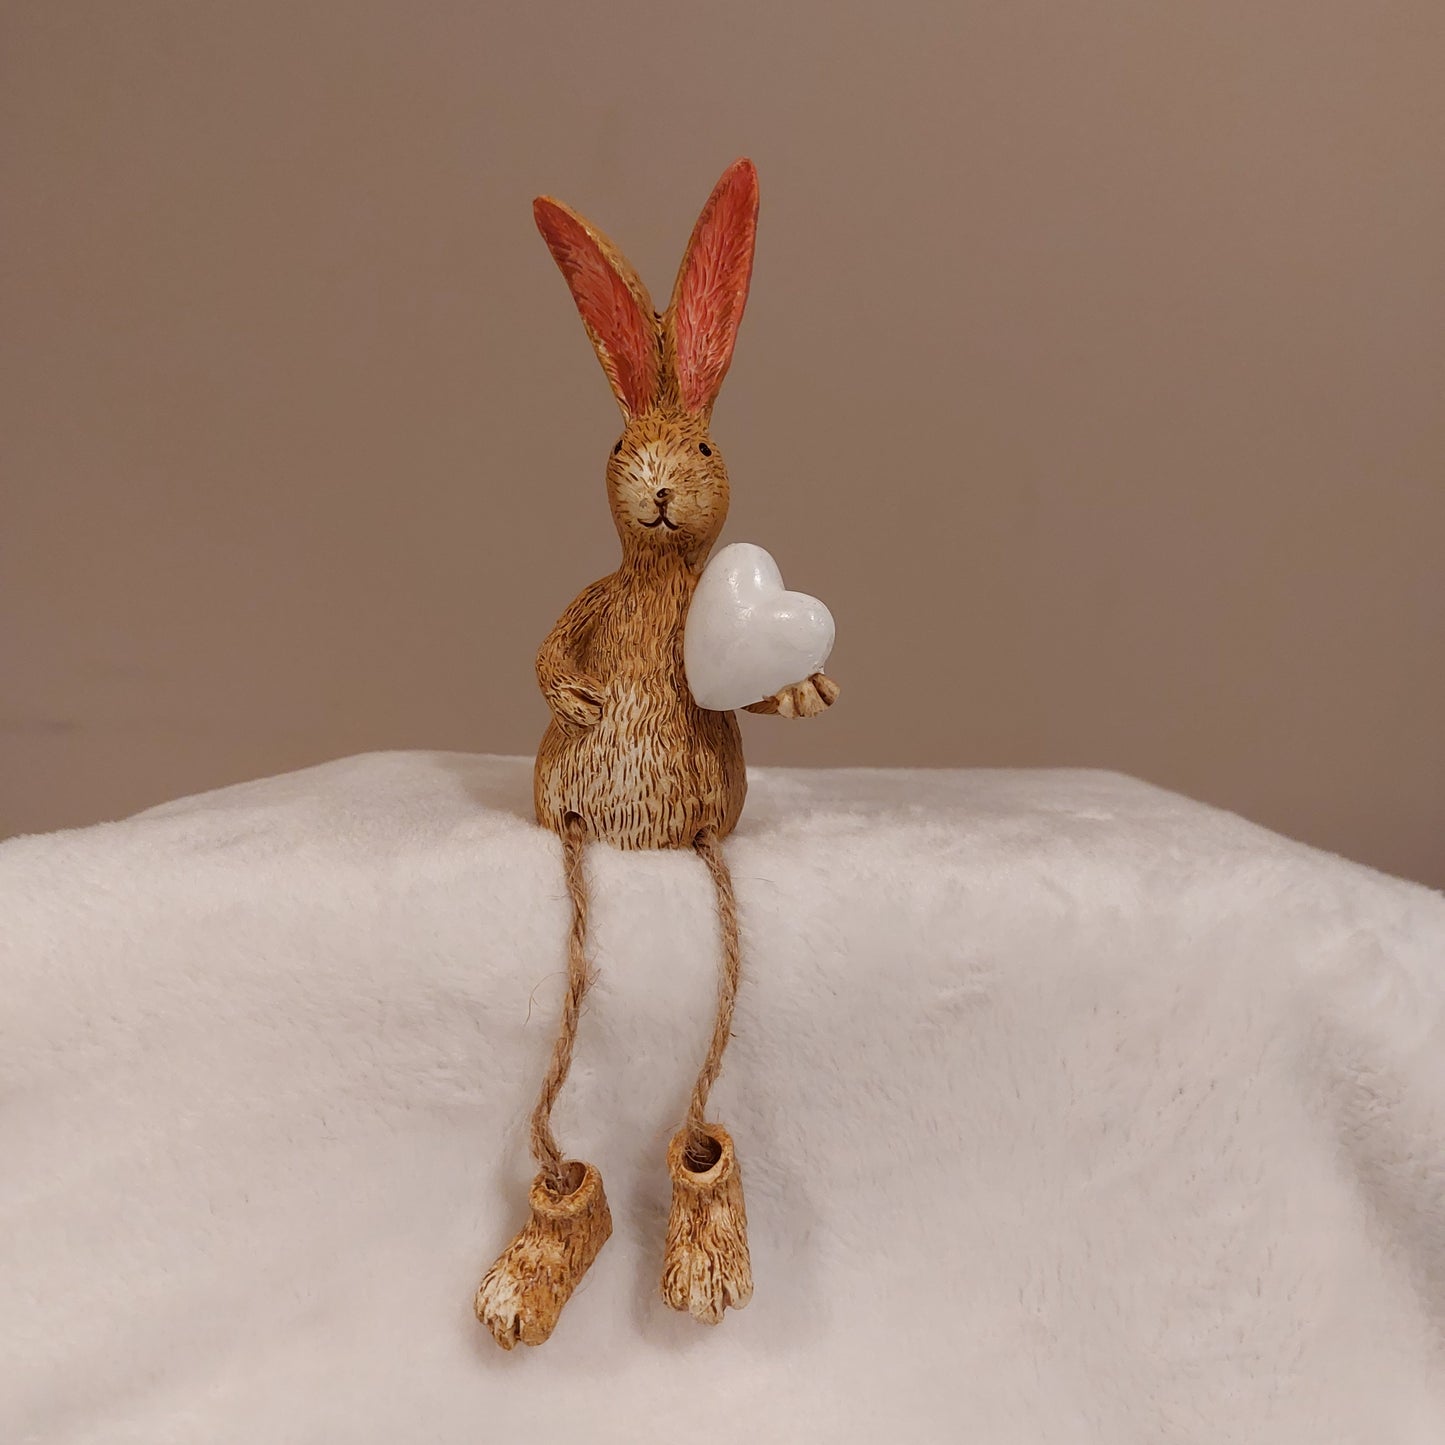 Bunny Holding a Heart with Large Ears Detail